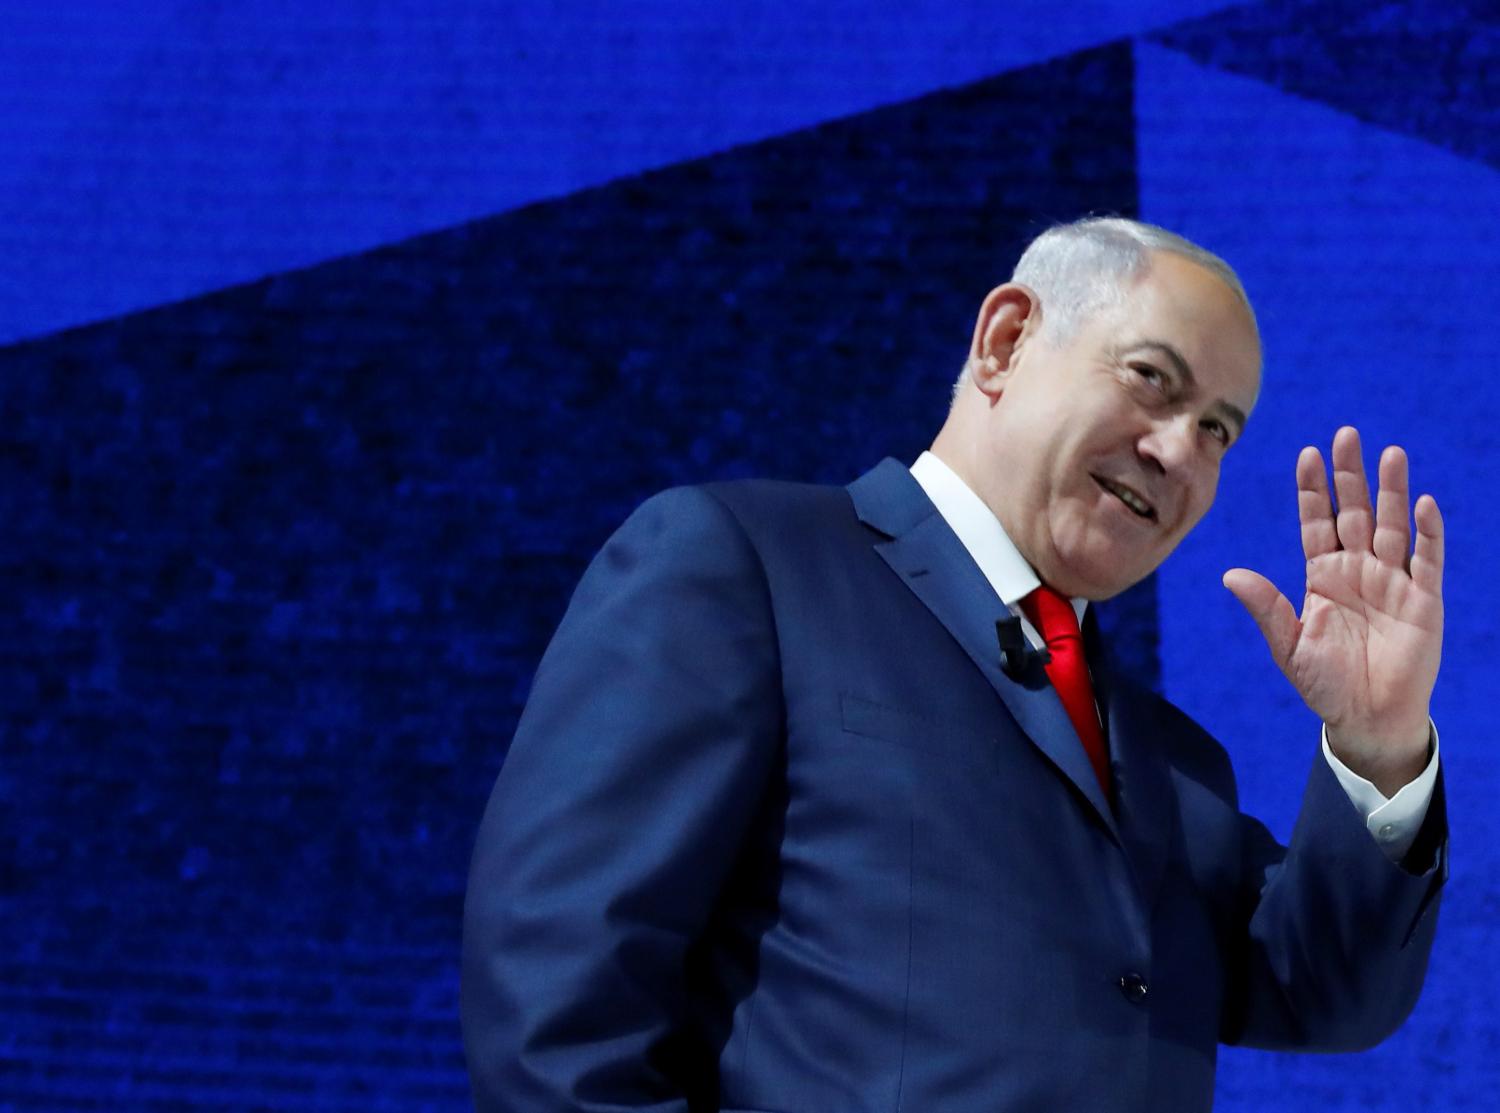 Israel's Prime Minister Benjamin Netanyahu waves as he leaves a plenary session during the World Economic Forum (WEF) annual meeting in Davos, Switzerland January 25, 2018. REUTERS/Denis Balibouse - RC1359EA4910